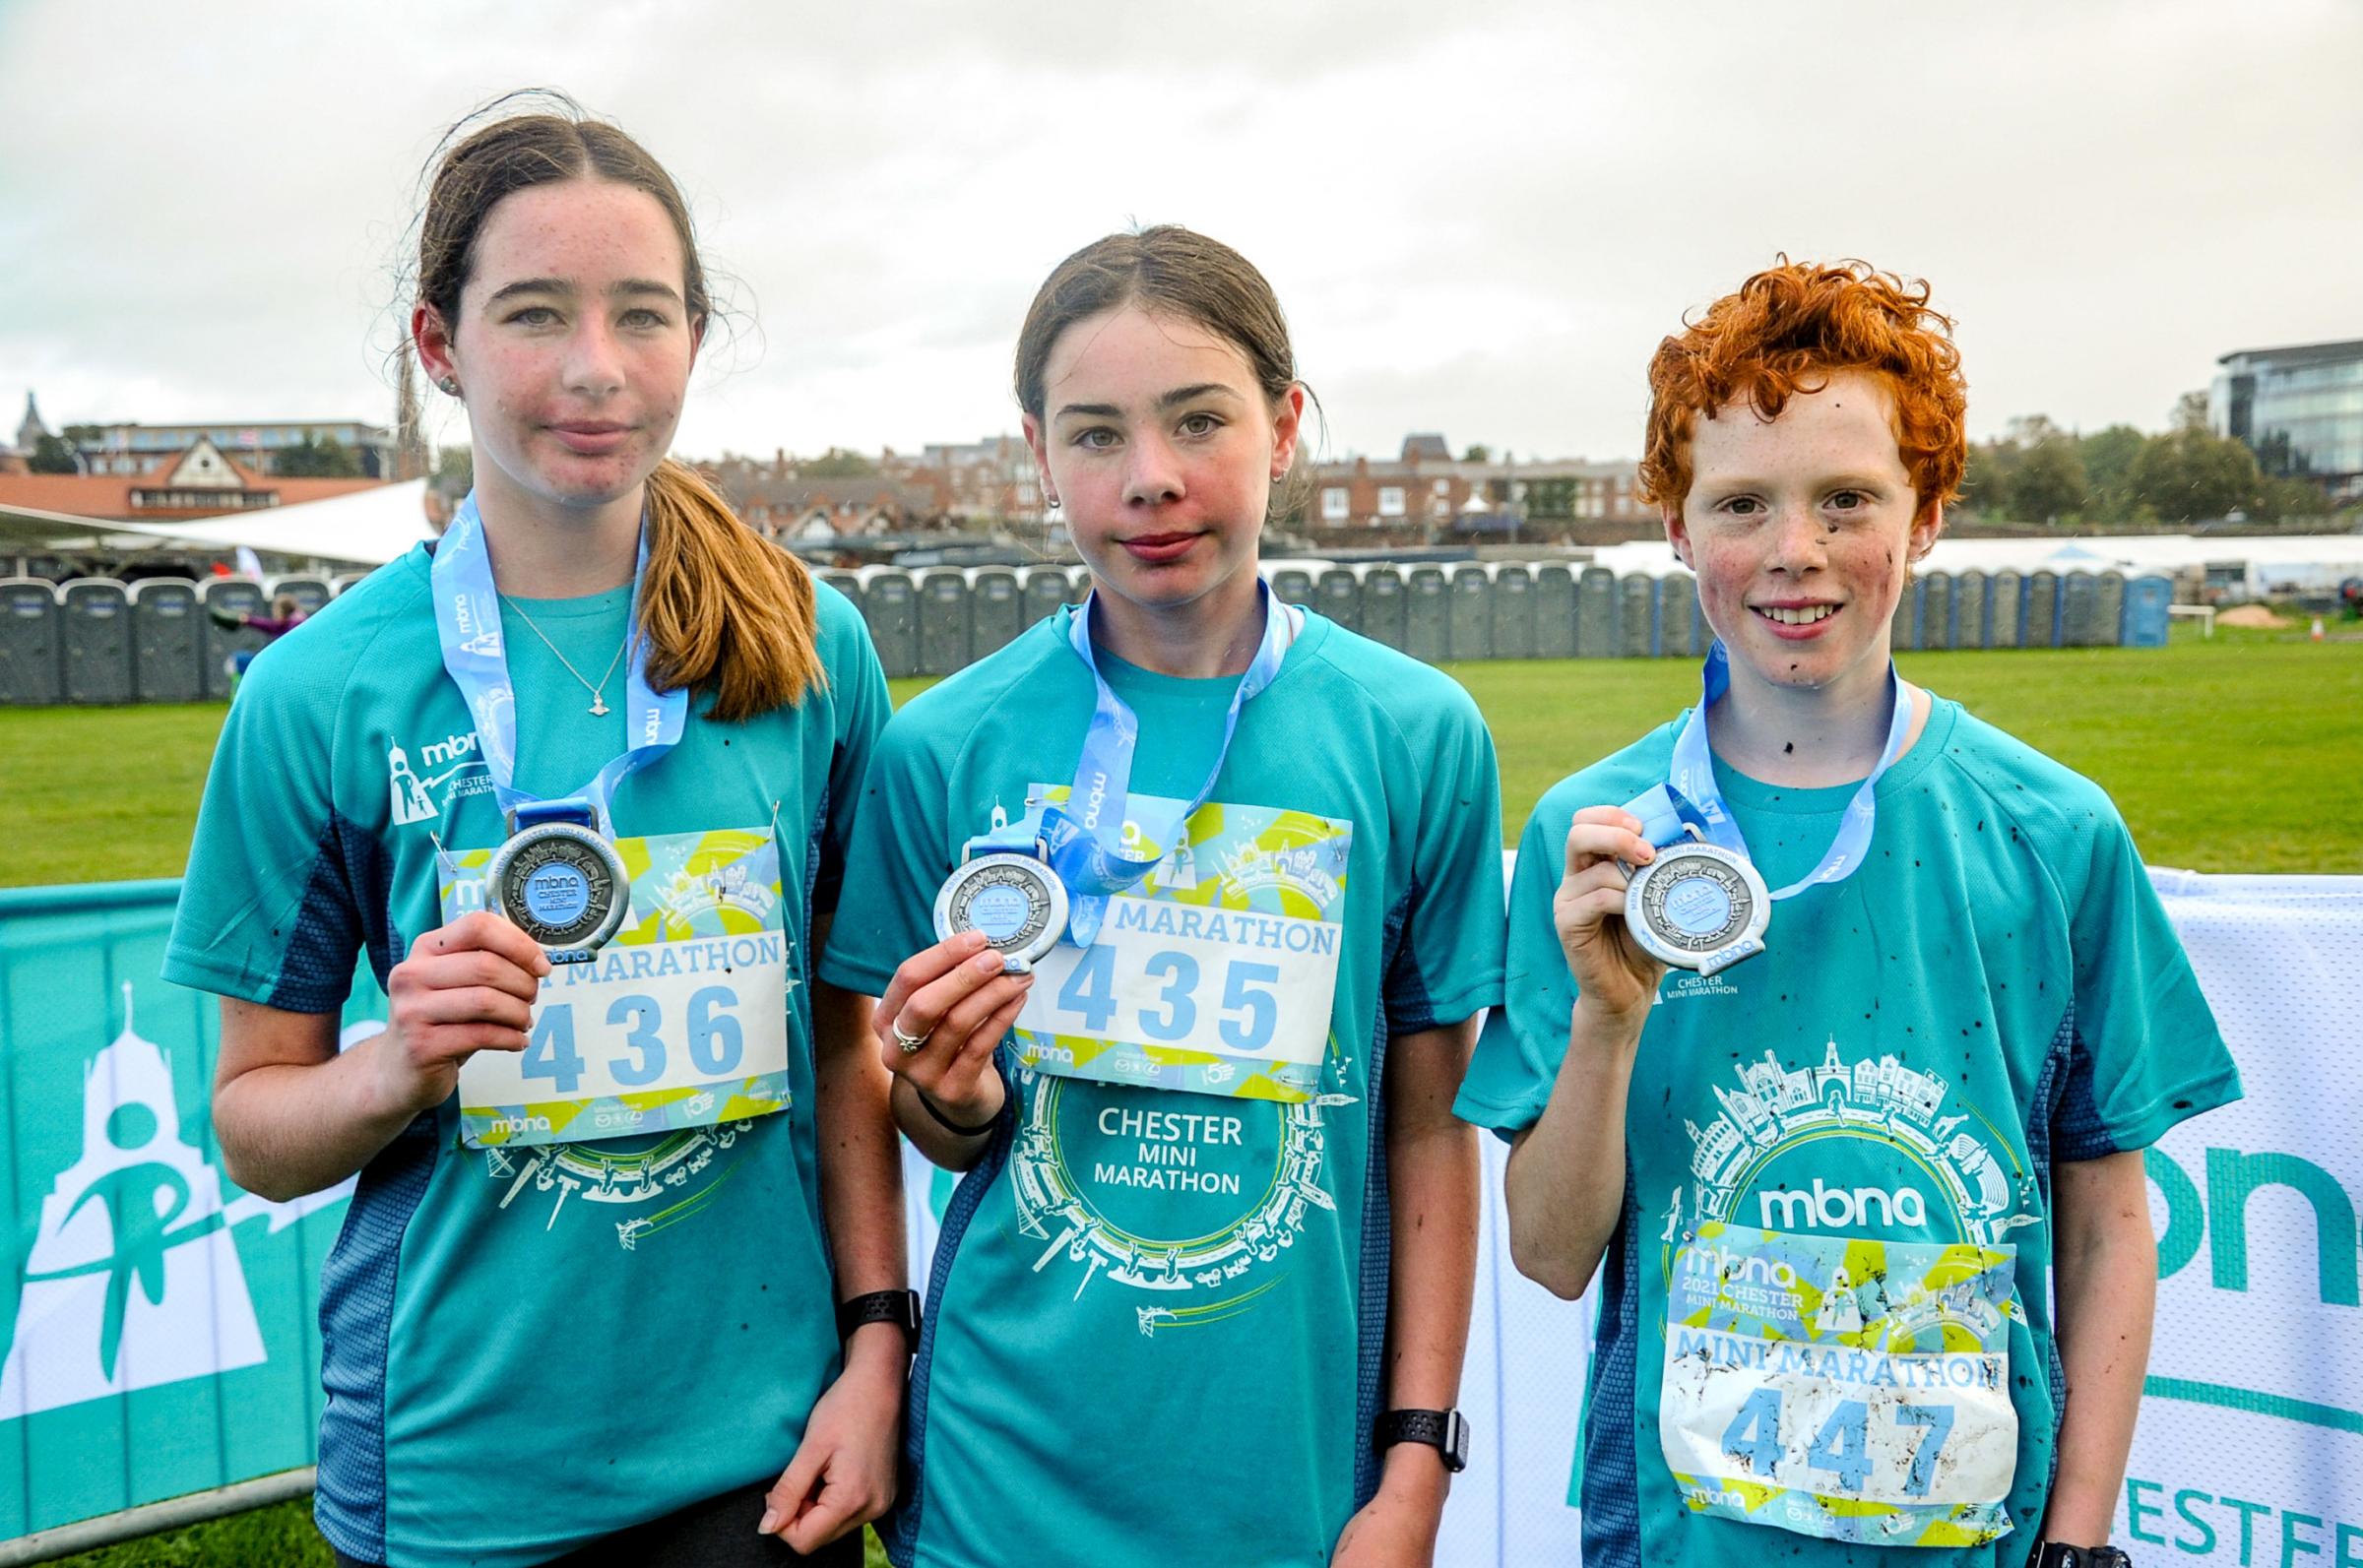 Chester Racecourse start and finish Grosvenor Park, Mbna Chester Marathon, Metric and Mini Marathon. Picture Winners of the Mini Marathon, centre first place Ruby Phillips 12, second place Amy Phillips 14 and third place Noah Woolgar 12. SW03102021.